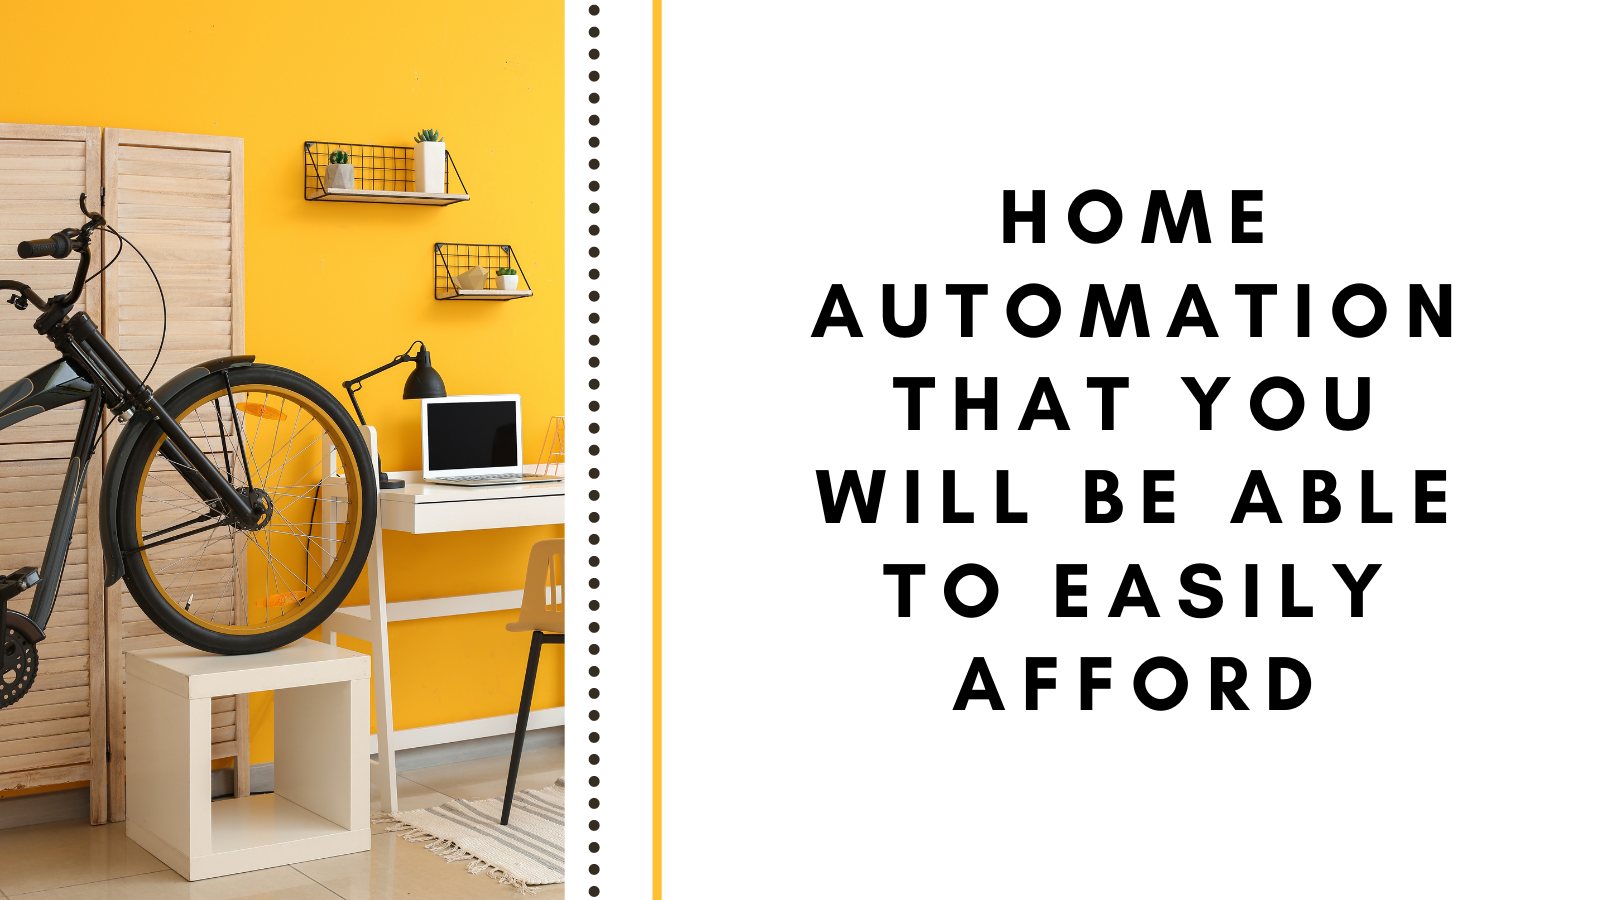 Home Automation That You Will Be Able to Easily Afford